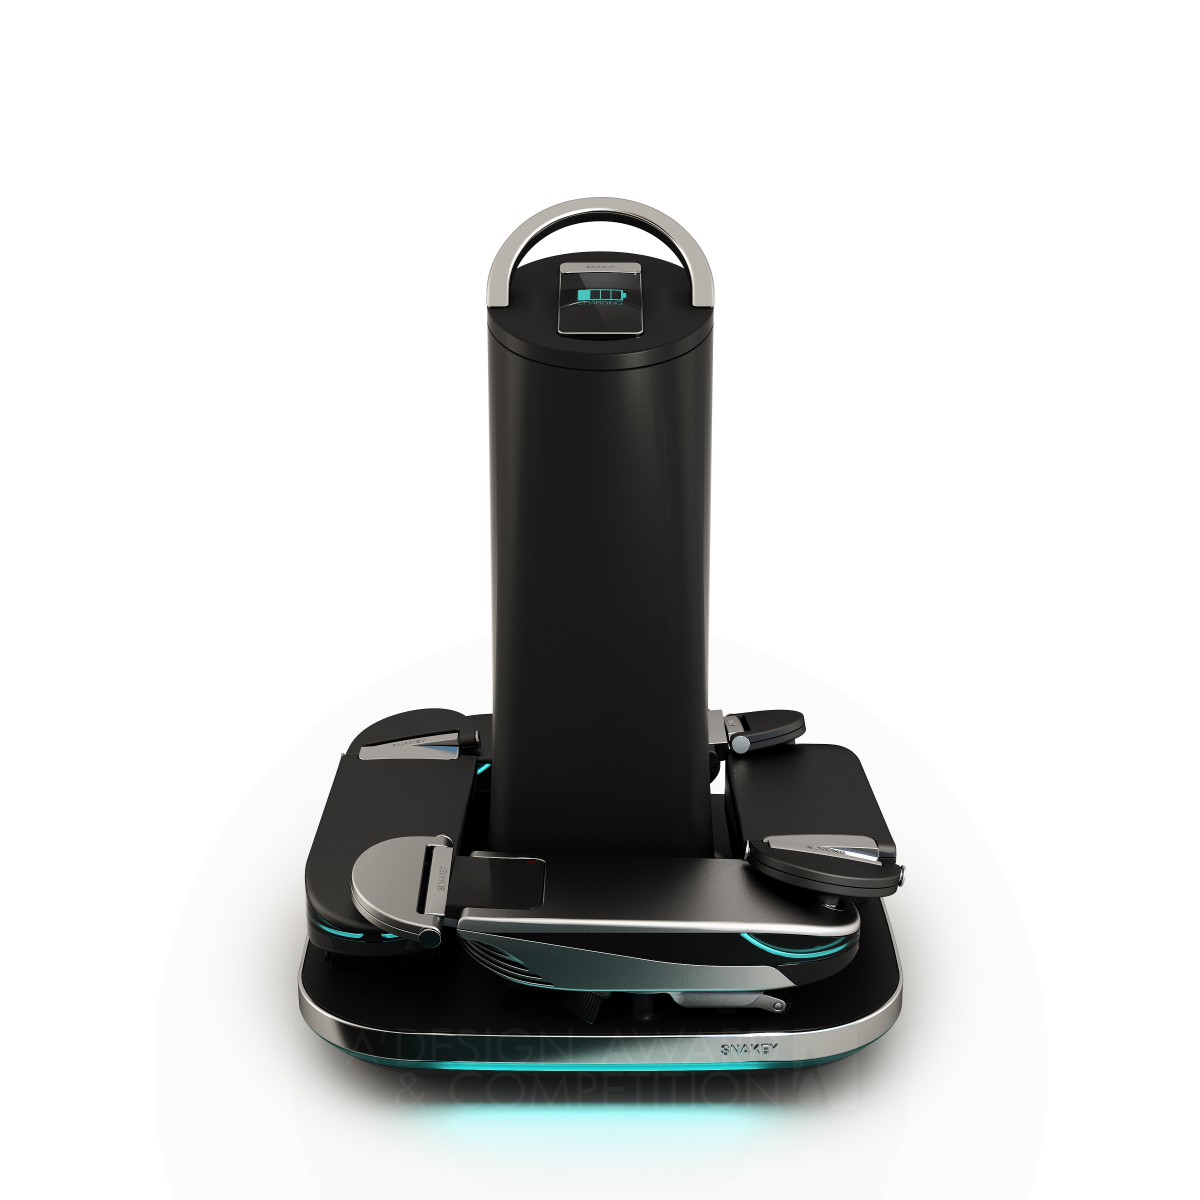 Snakey Cleaning Robot by Designershive, Meiban International